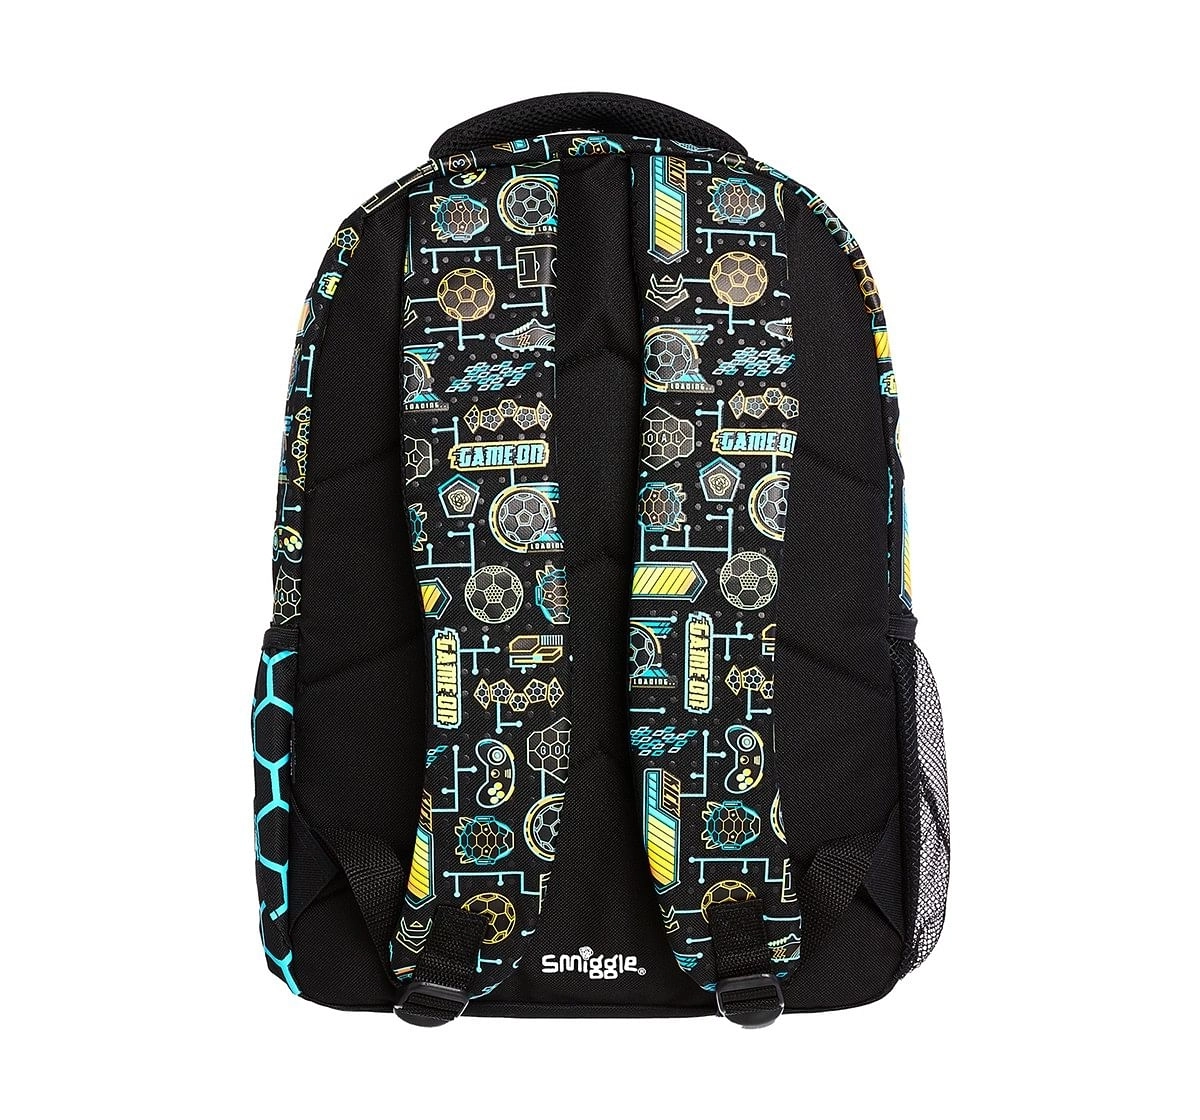 Smiggle Far Away Backpack - Football Print Bags for Kids age 3Y+ (Black)